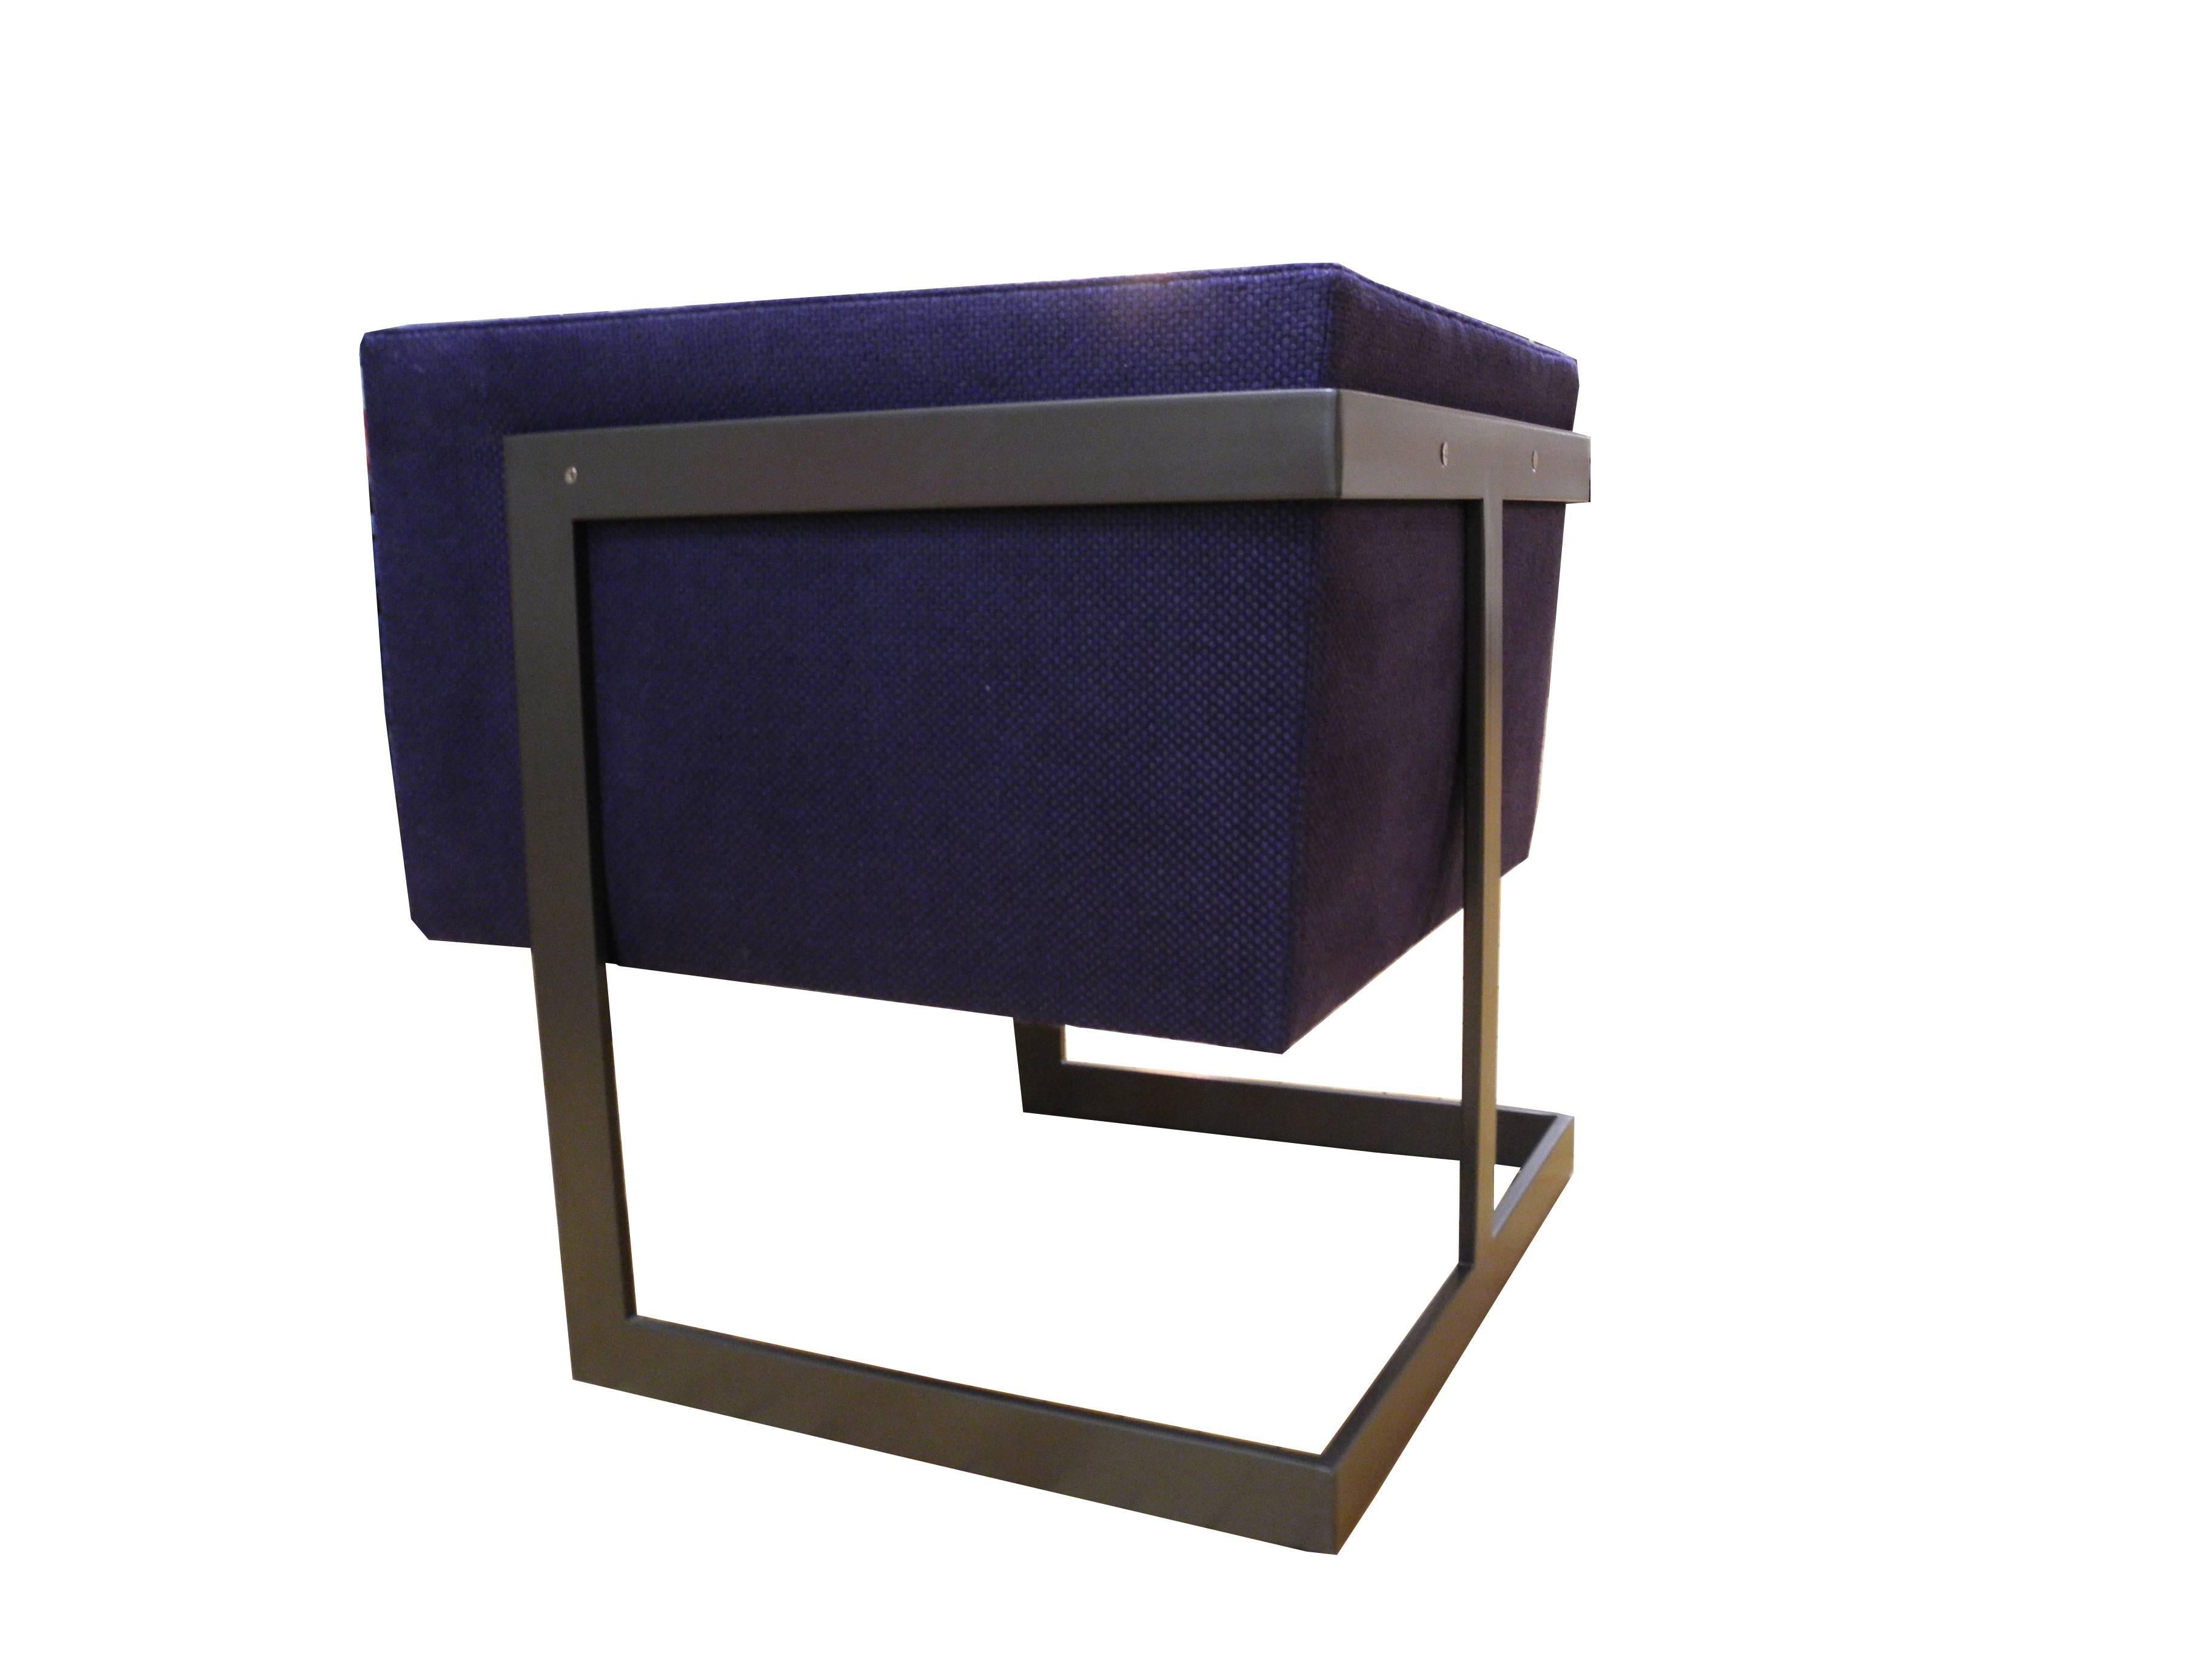 Pair of Petite Modern Bronze and Navy Cubed Armchairs by Milo Baughman 1